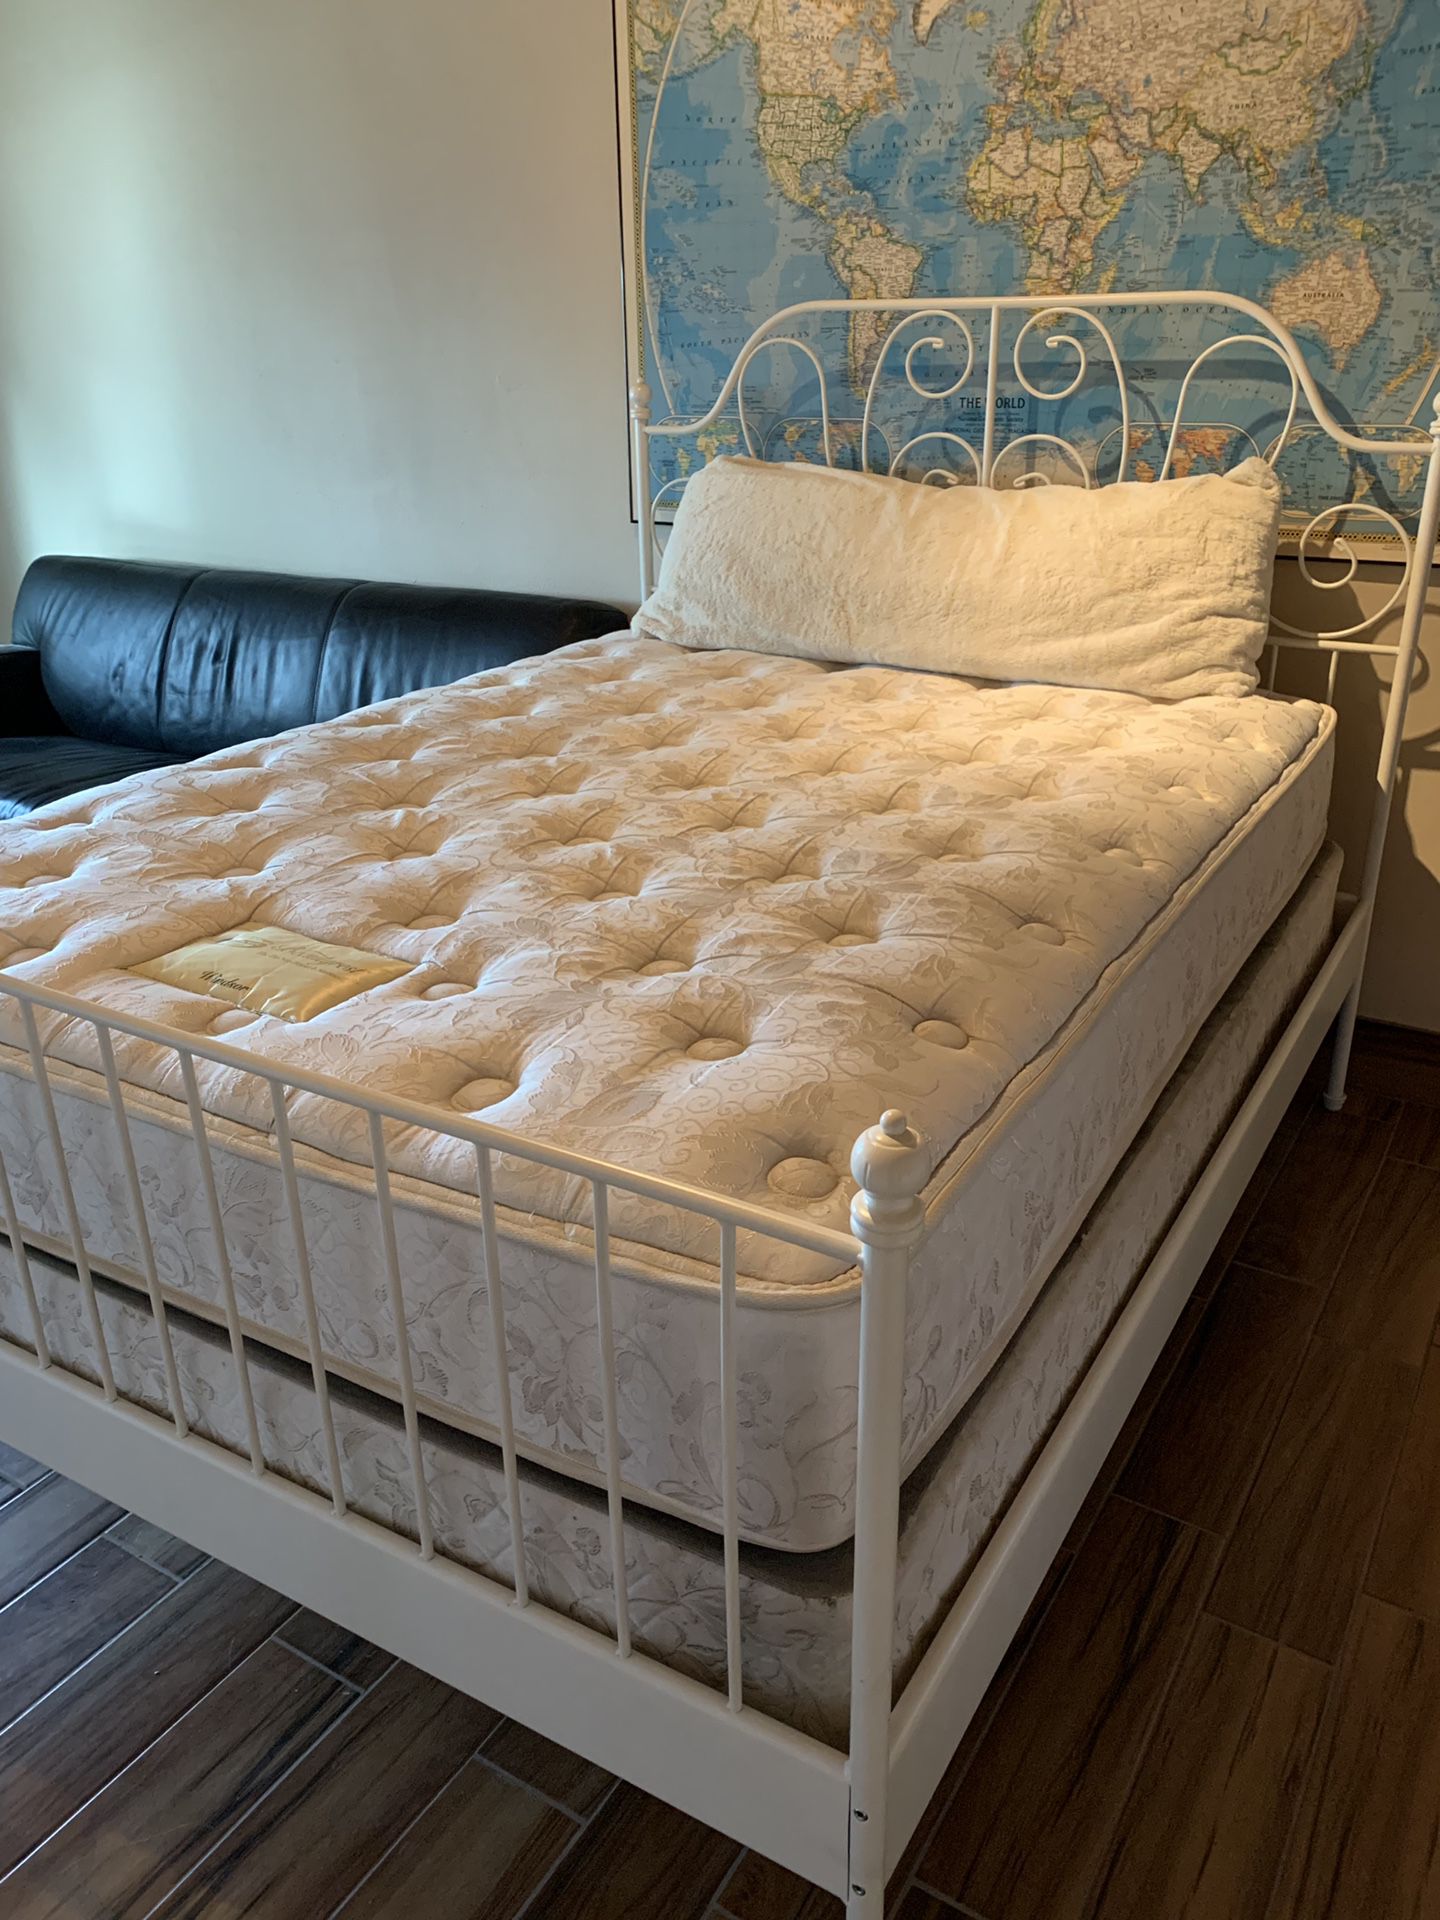 IKEA queen bed - frame (mattress and box spring included) for Sale in Tucson, AZ - OfferUp